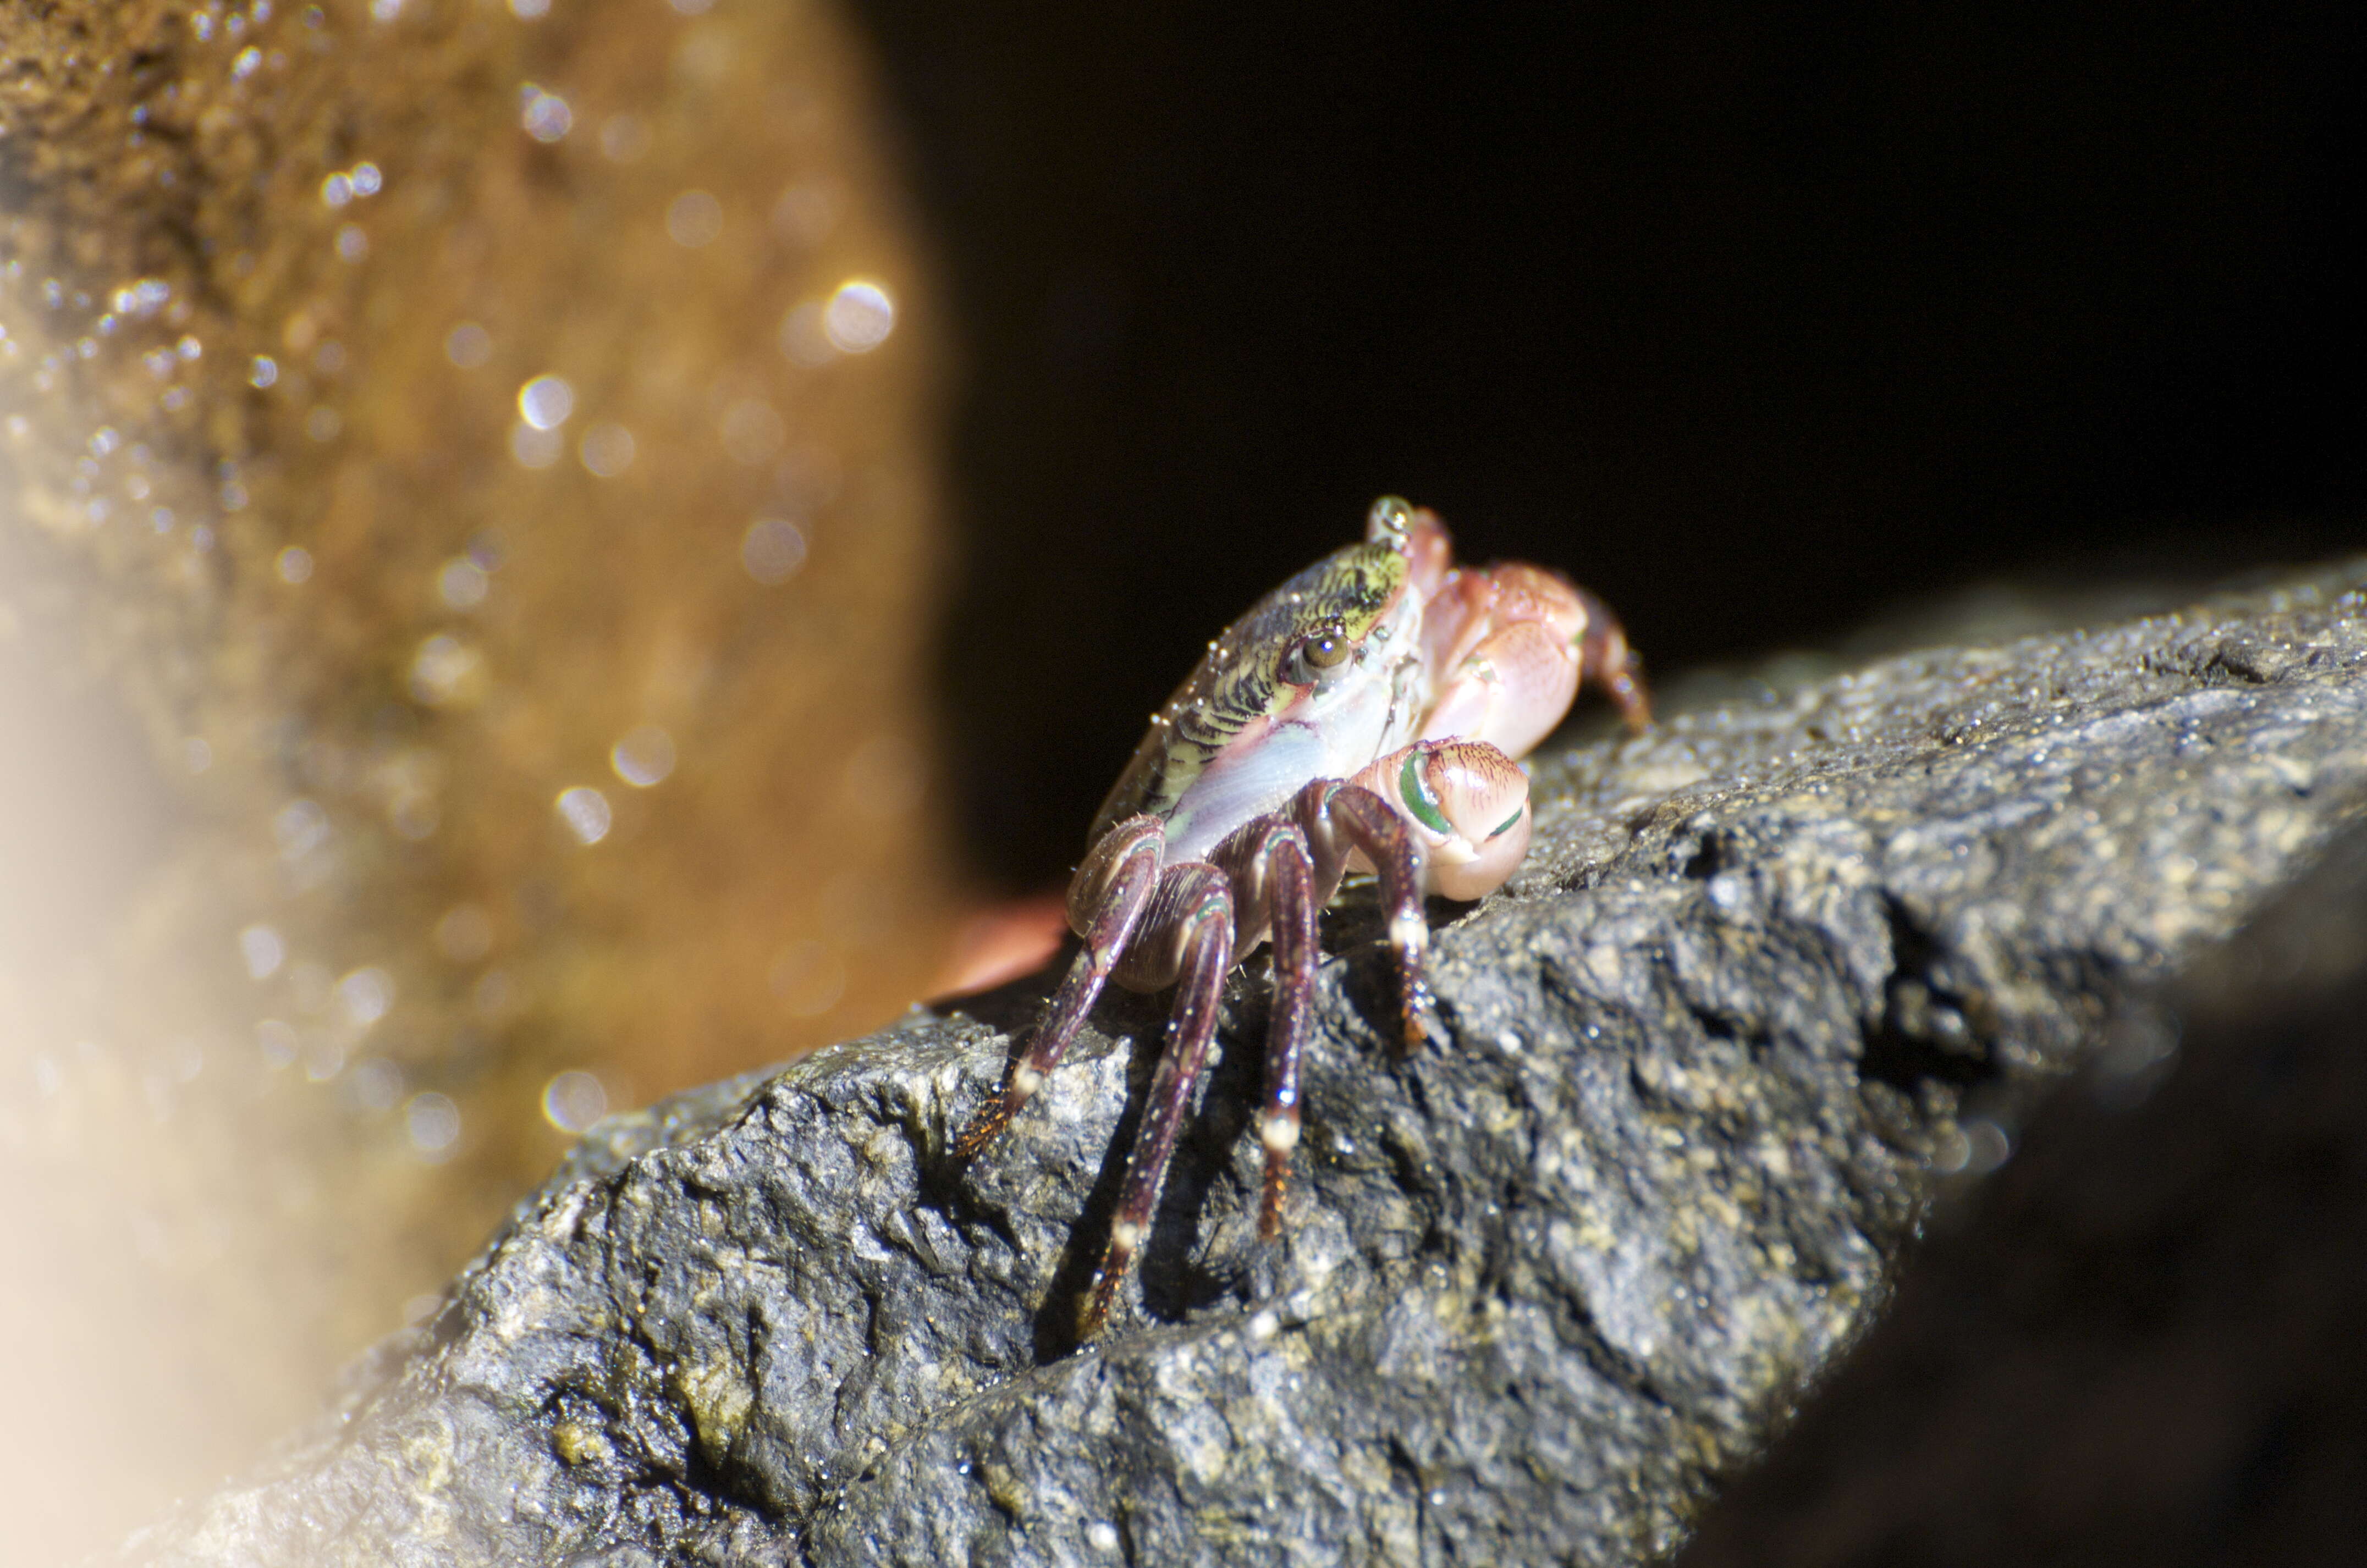 Image of striped shore crab